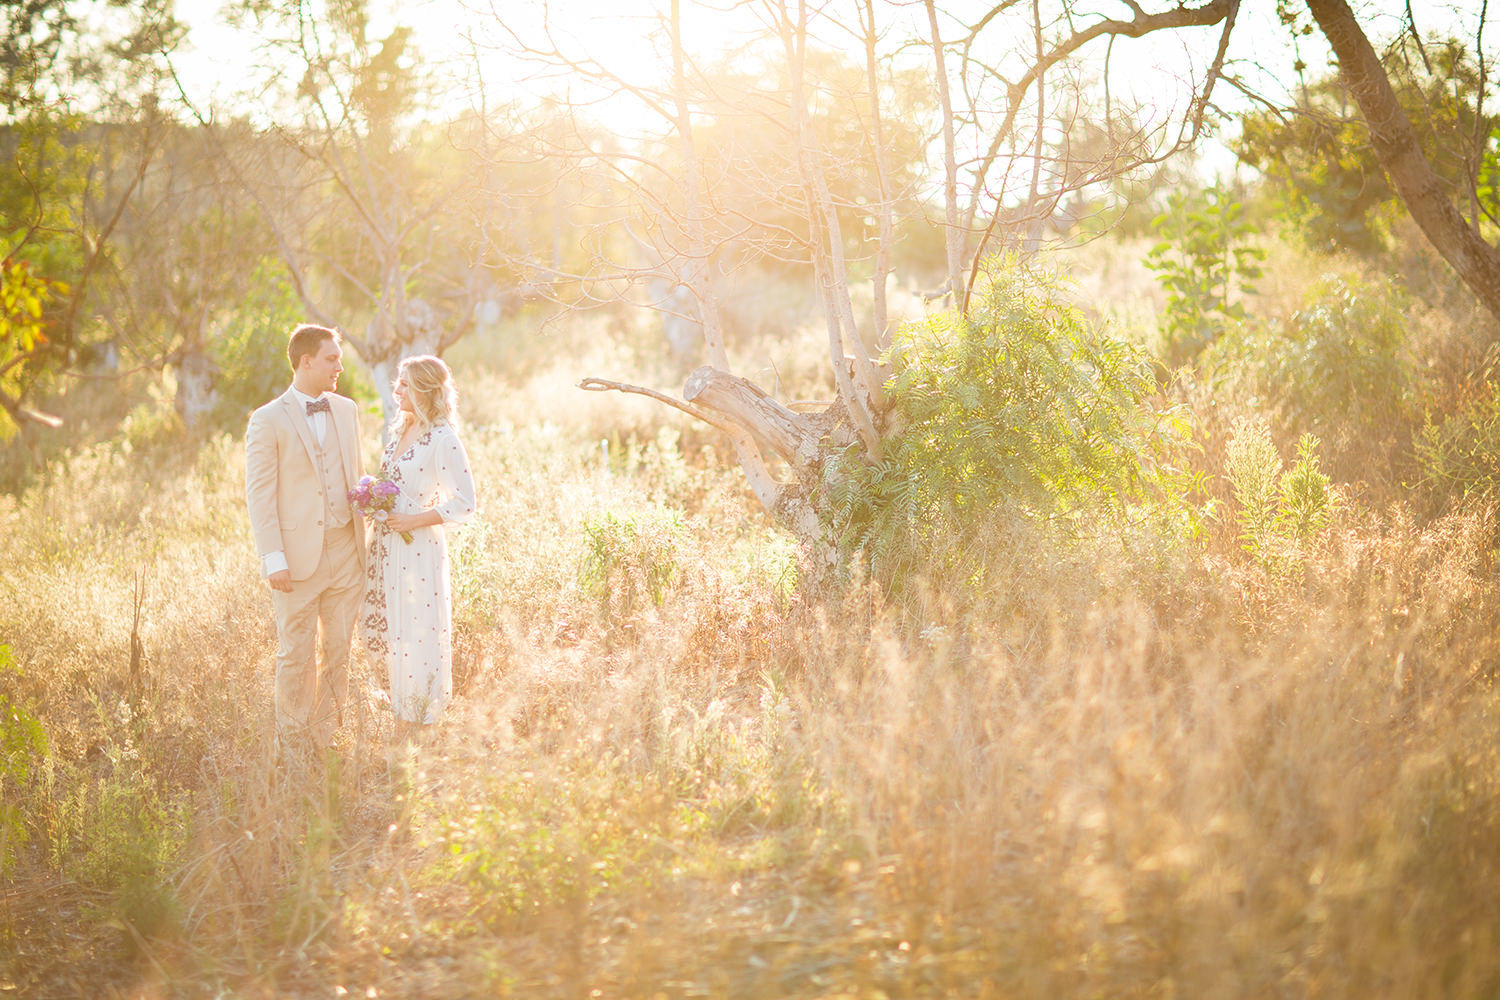 amazing light with bride and groom in open field